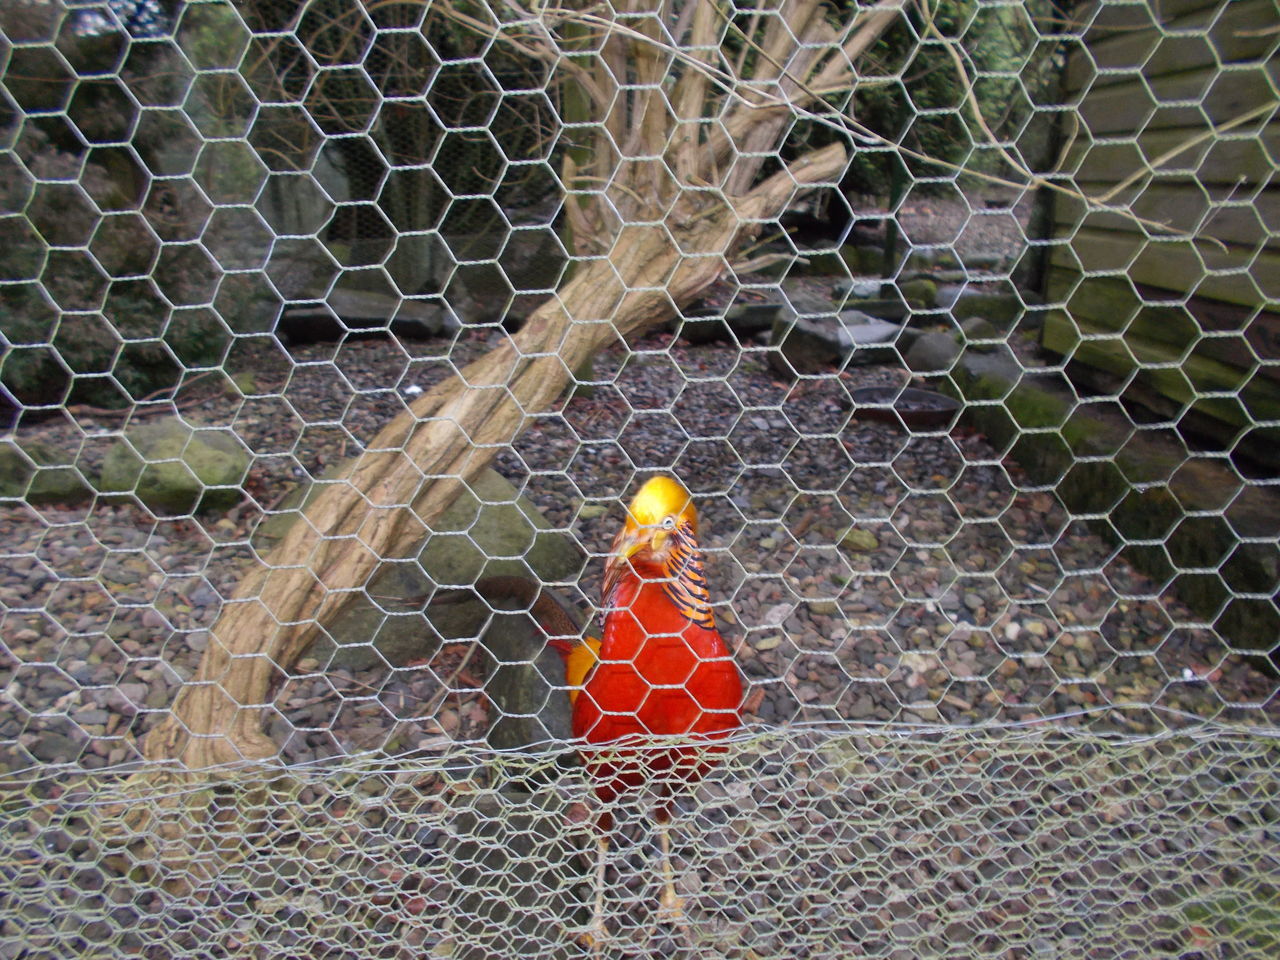 CLOSE-UP OF PARROT ON FENCE